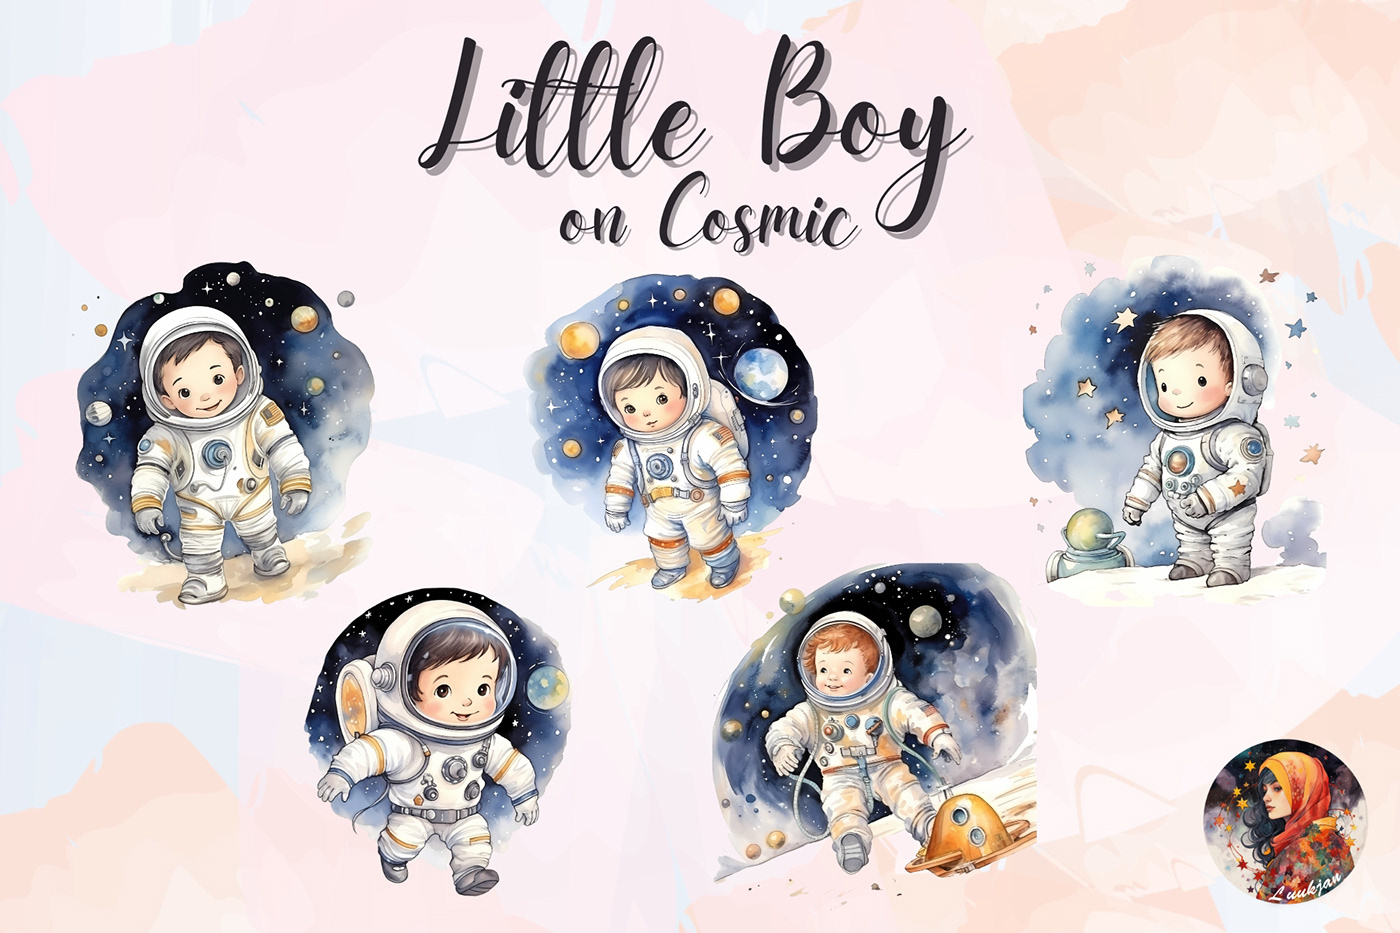 Little Boy traveling space suit stars Space  cosmos exploration astronaut galaxy adventure